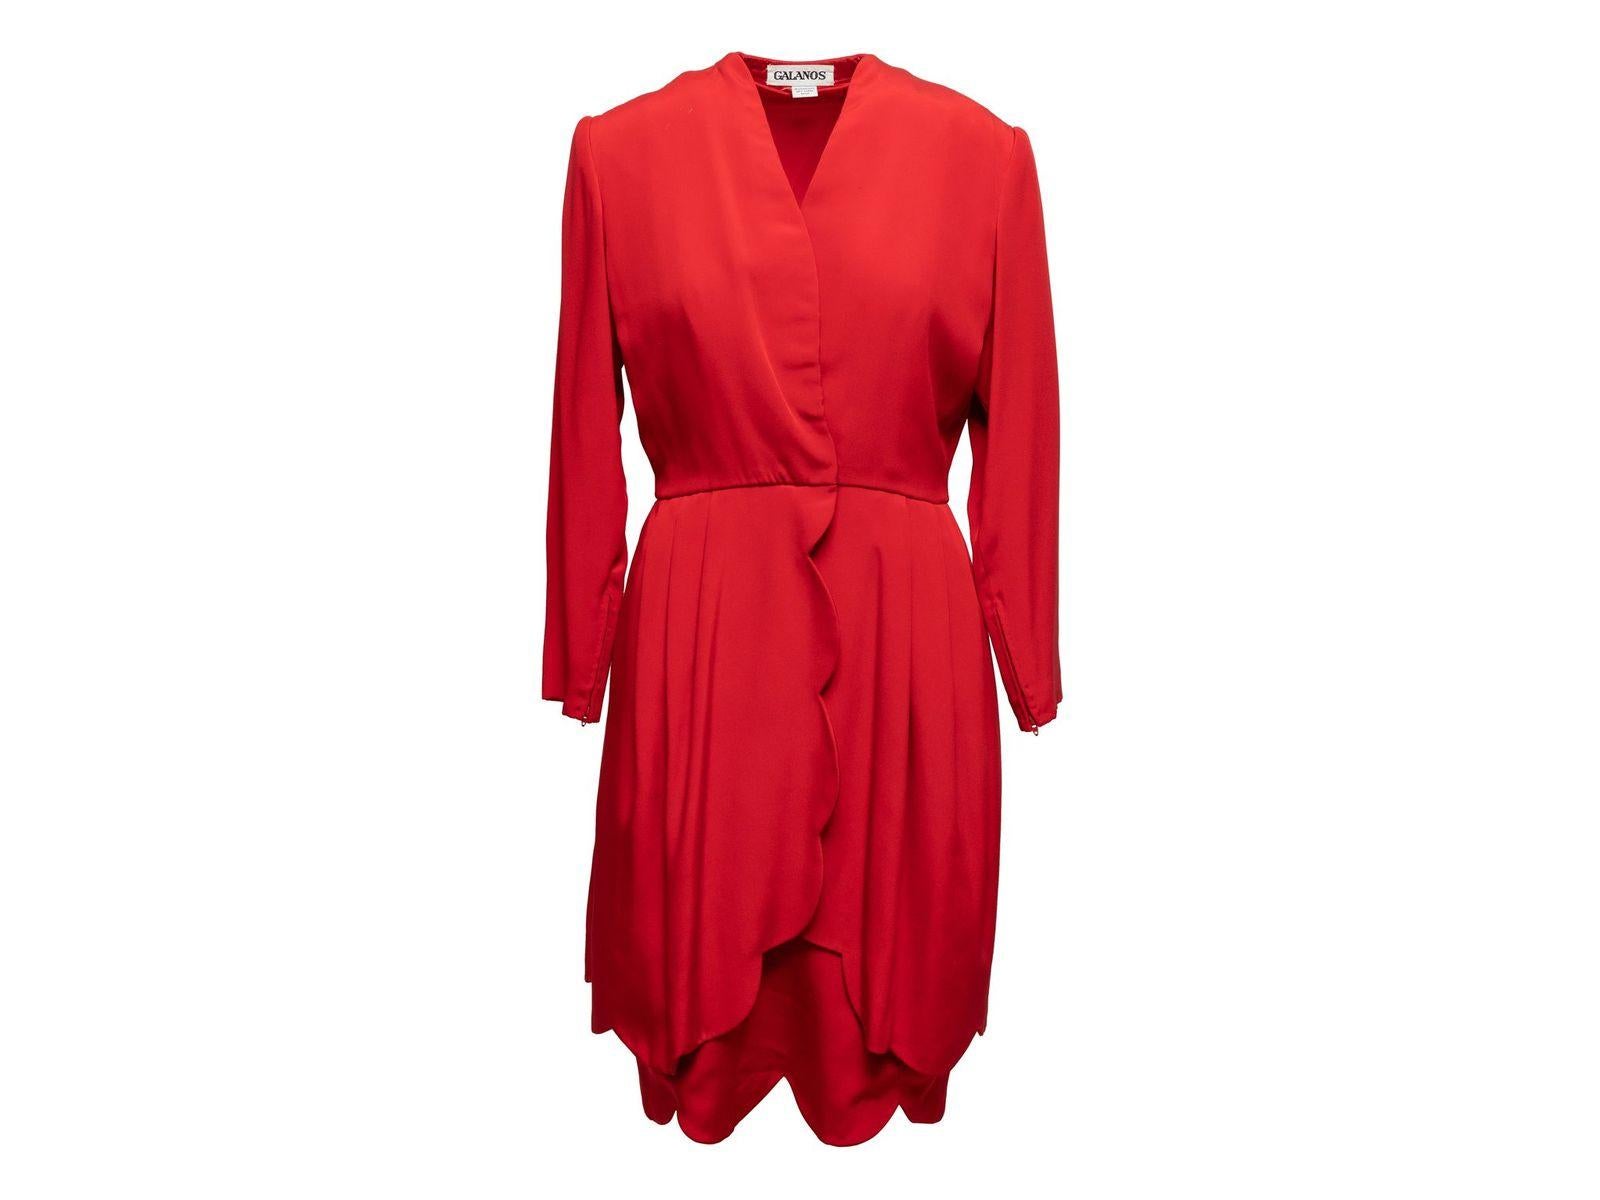 James Galanos Red Silk Scalloped Hem Dress In Good Condition For Sale In New York, NY